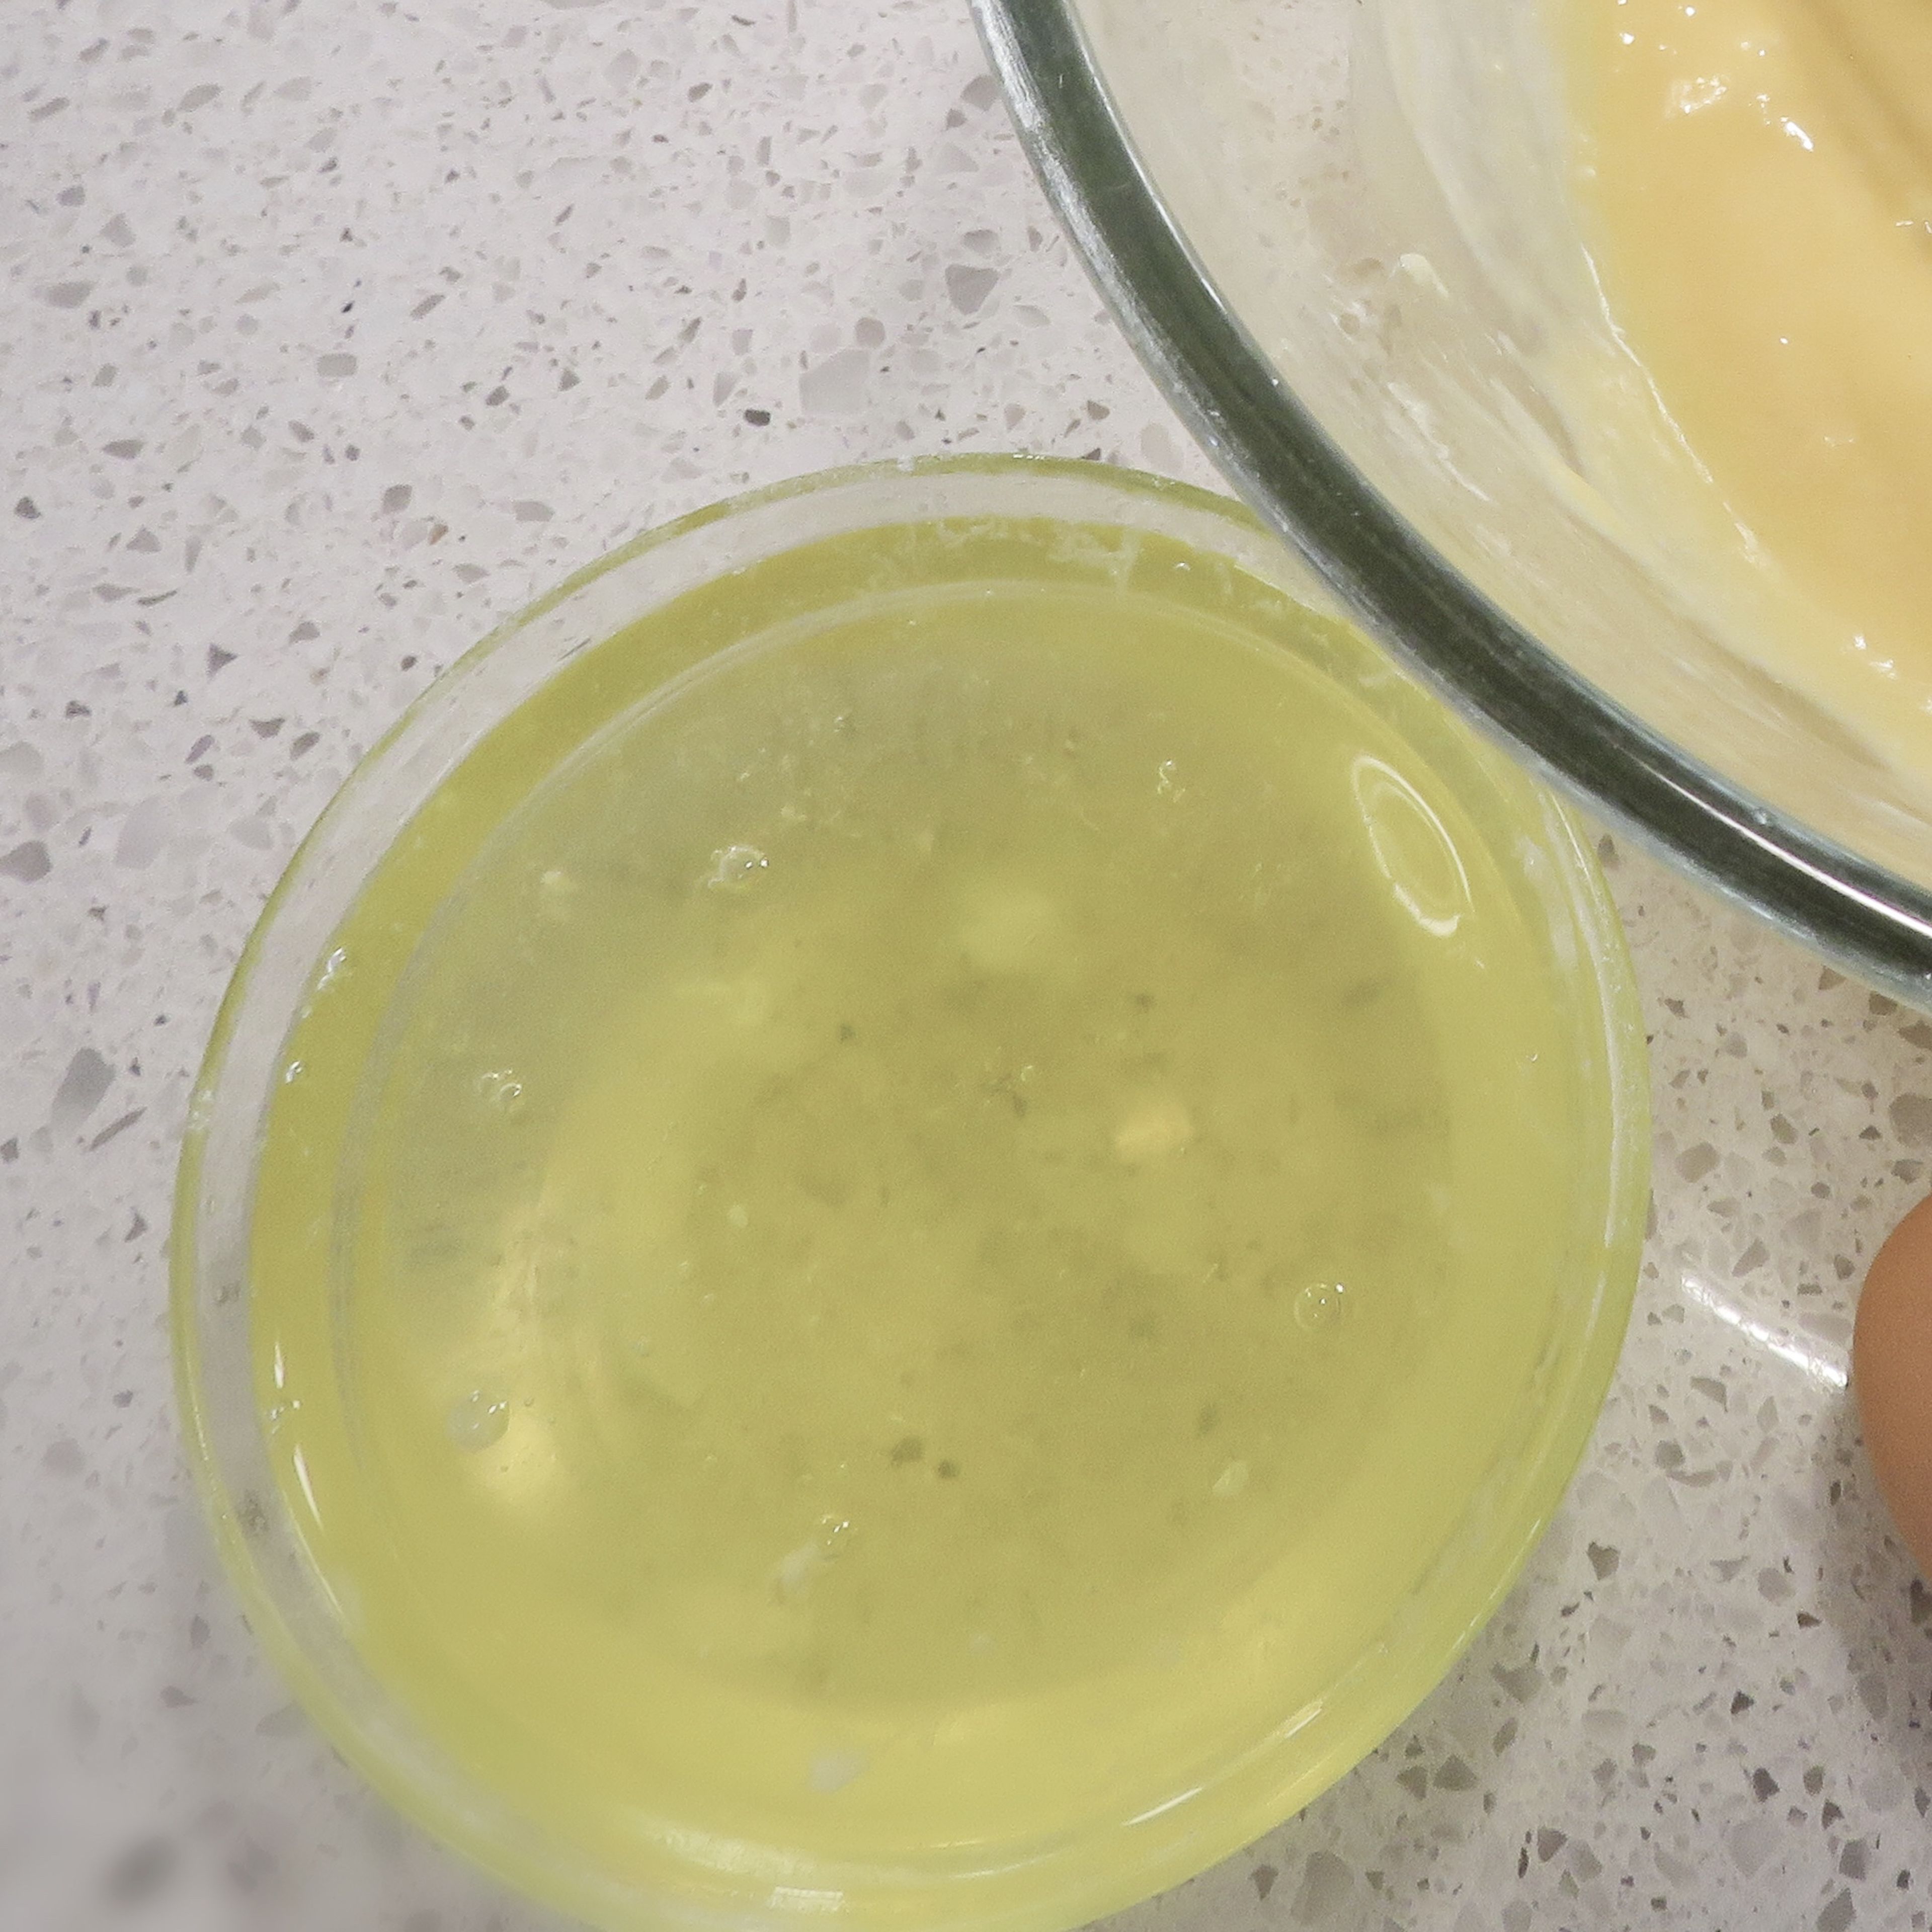 Add a pinch of salt and a couple drops of vinegar to the egg white.